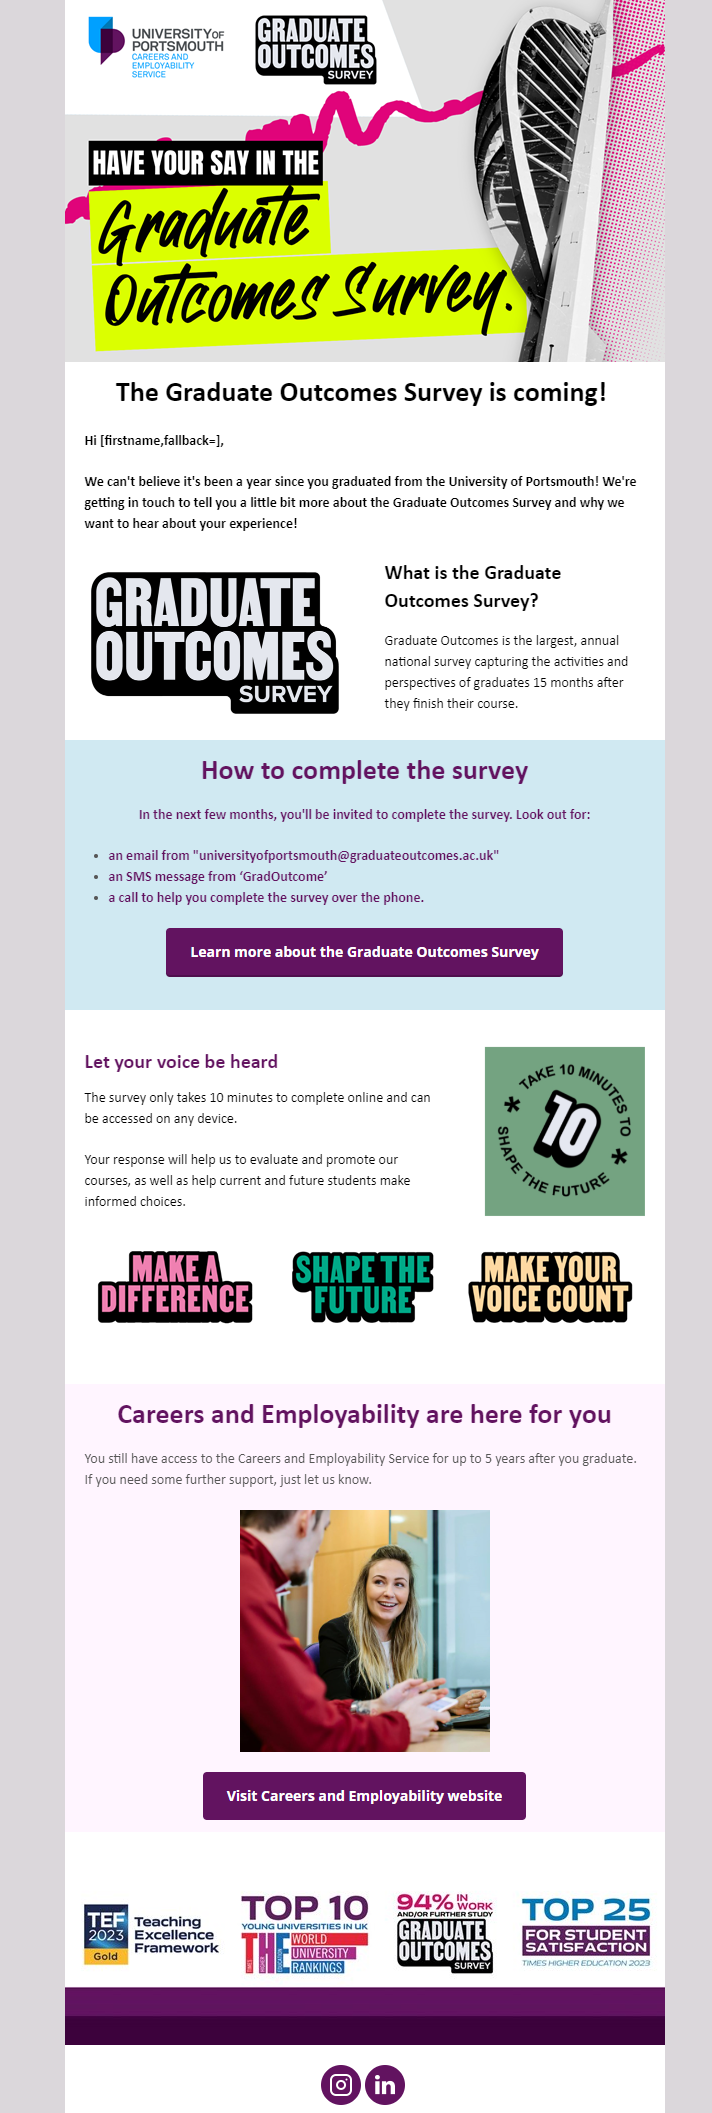 University of Portsmouth - example email